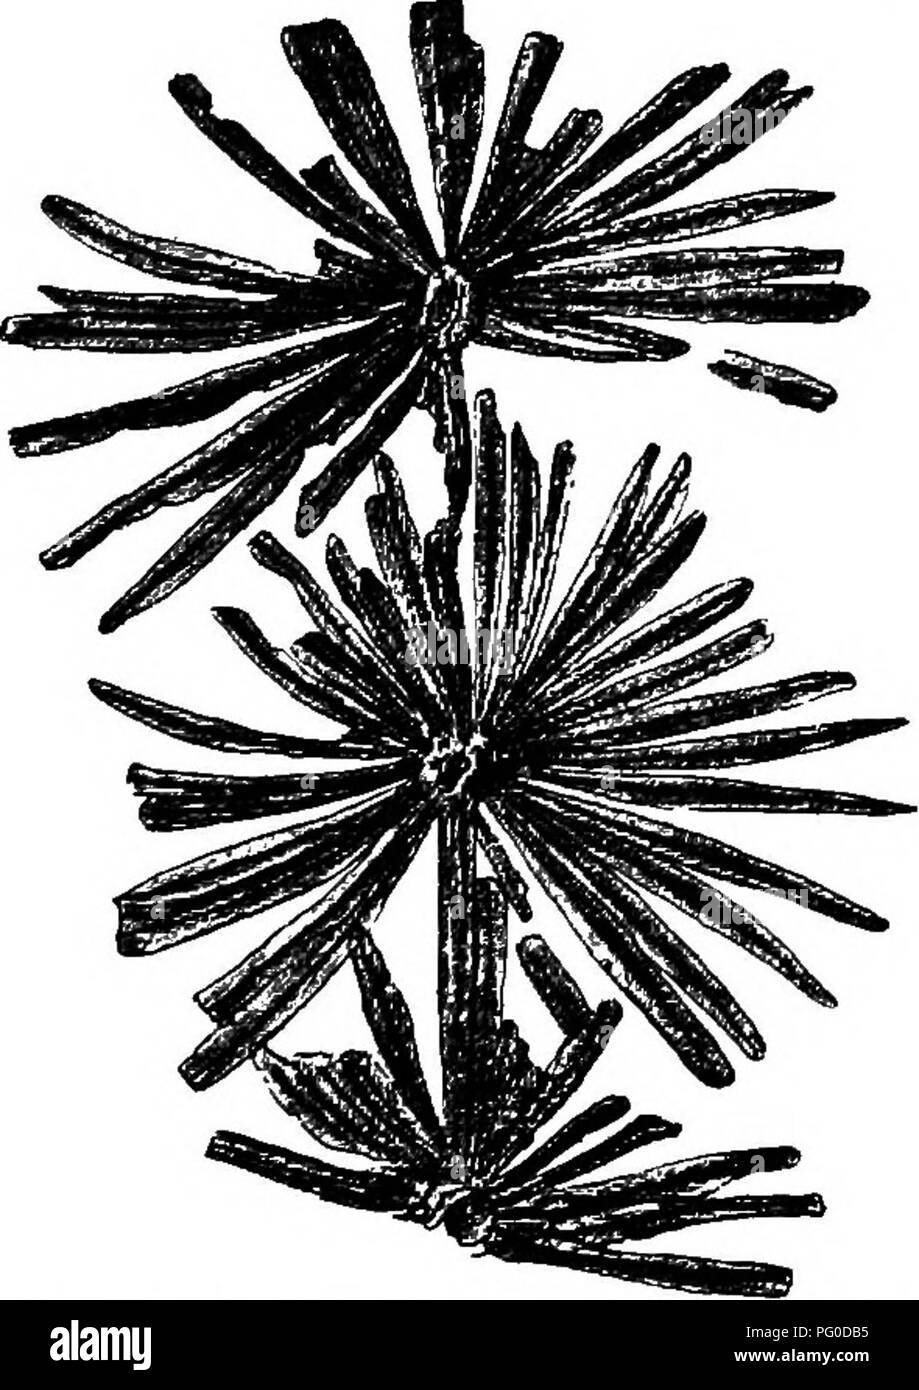 . Fossil plants : for students of botany and geology . Paleobotany. X] ANNULARIA. 339 about the middle, 1â5 cm. in length and 1â3 mm. broad, hairy on the upper surface'; each leaf is traversed by a single vein.. Fig. 88. Brniioh. of Annularia stellata (Sehloth.). | nat. size. Prom a specimen in the Collection of Mr E. Kidston. Upper Coal- Measures, Eadstook. Each whorl contains 16â32 segments, which are connected basally into a collar or narrow sheath; the lateral segments are usually longer than the upper and lower. The branches are about 6â20 mm. broad, with finely ribbed intemodes 3â7 cm. l Stock Photo